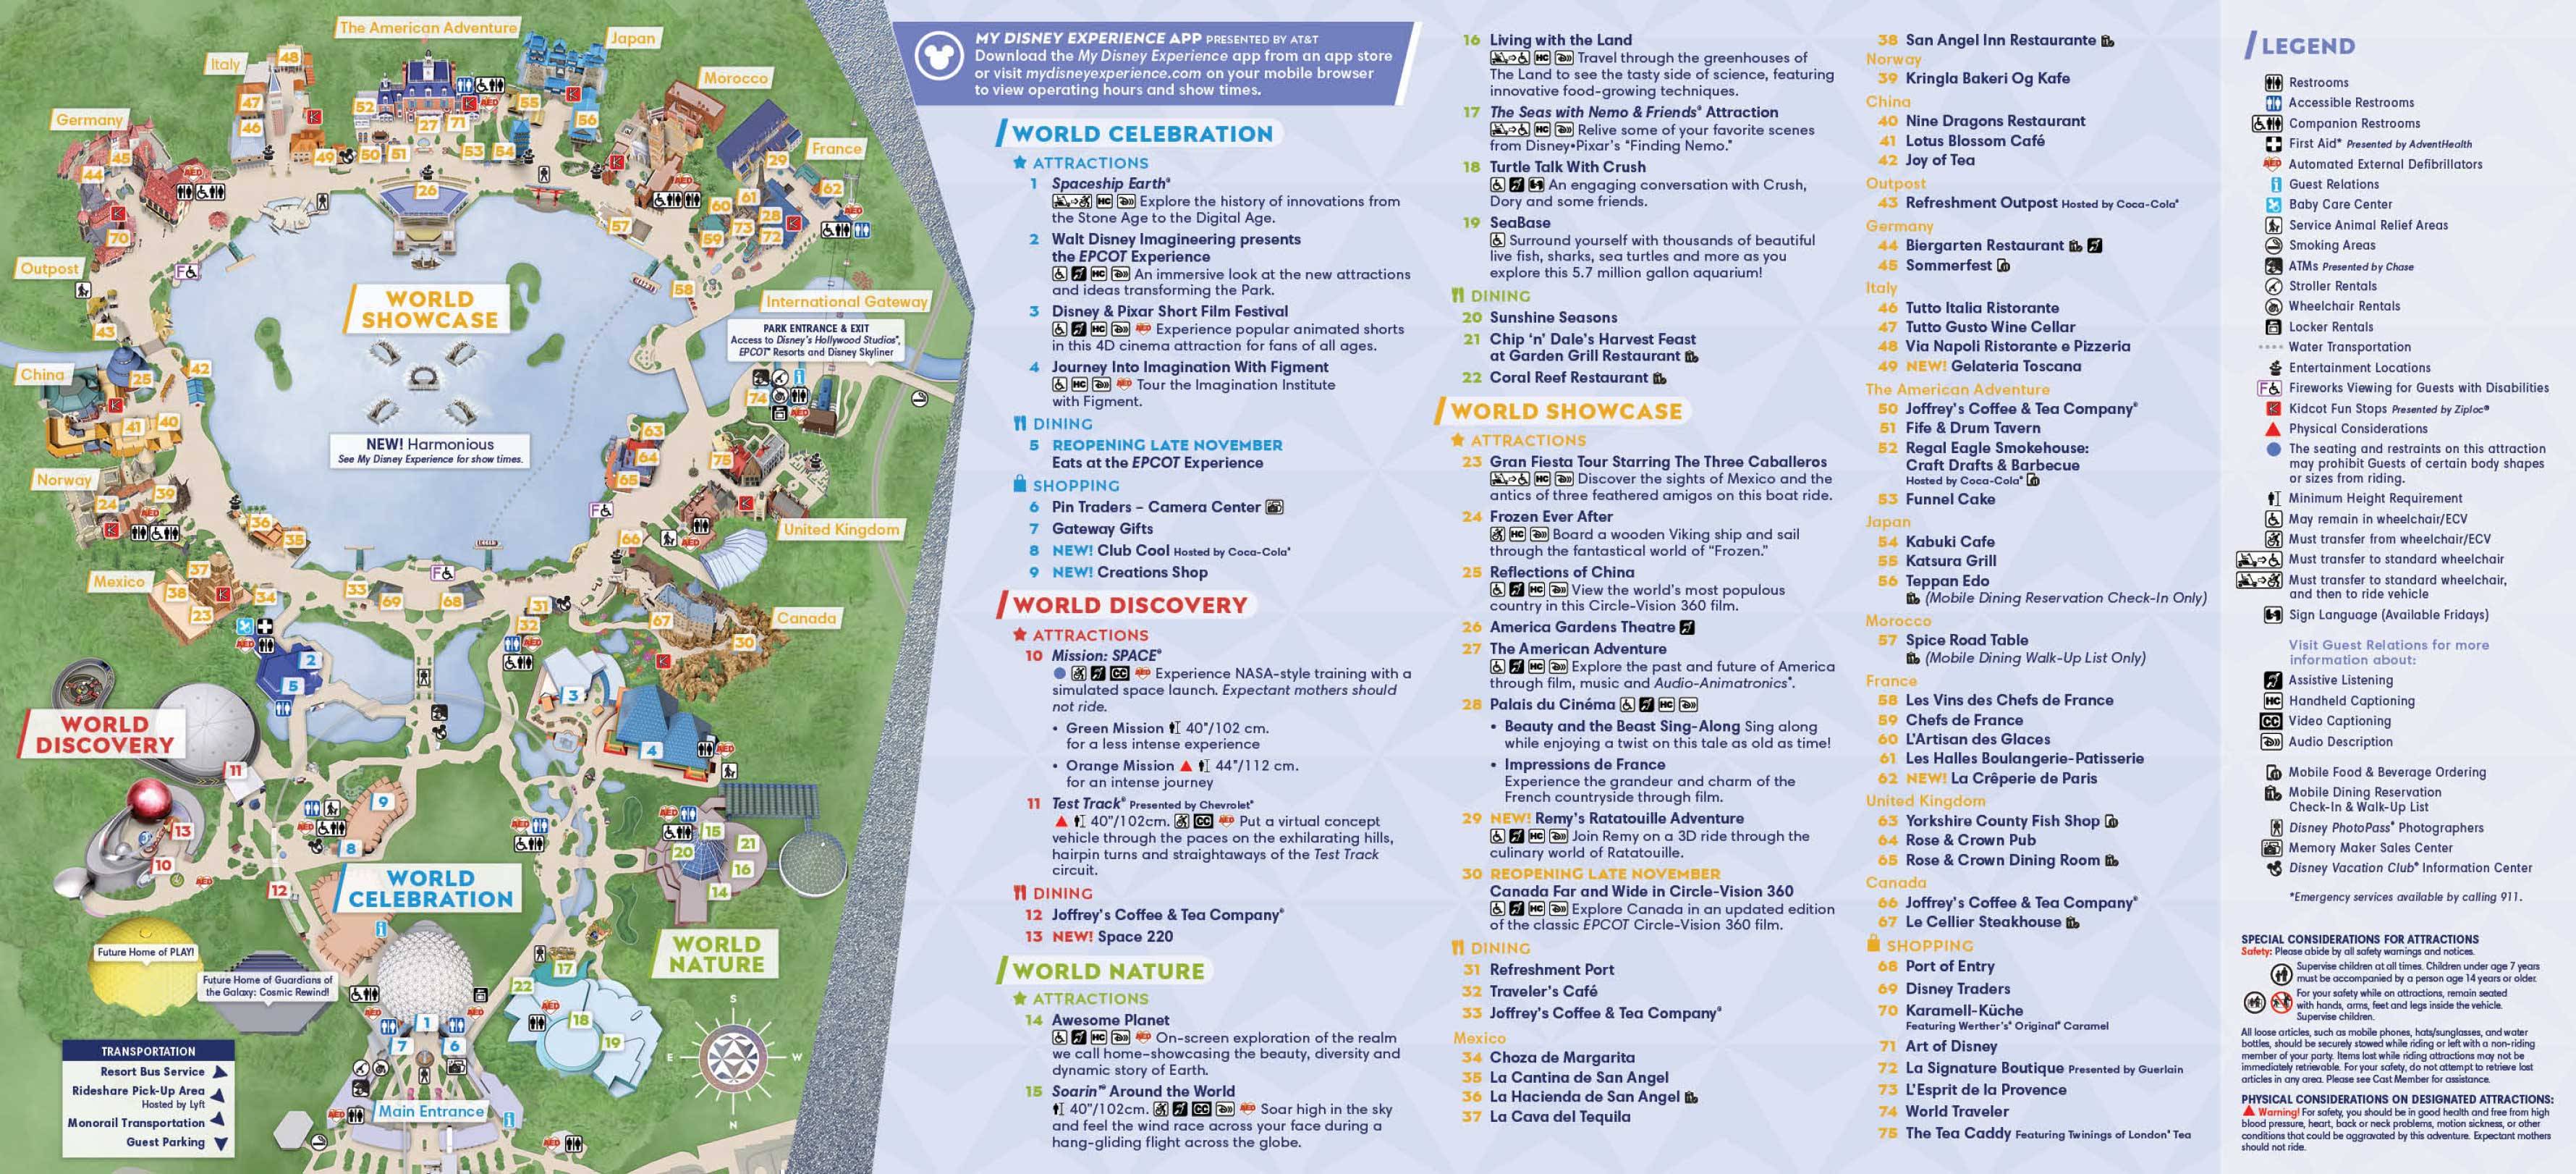 New guidemap shows the new neighborhood layout of EPCOT